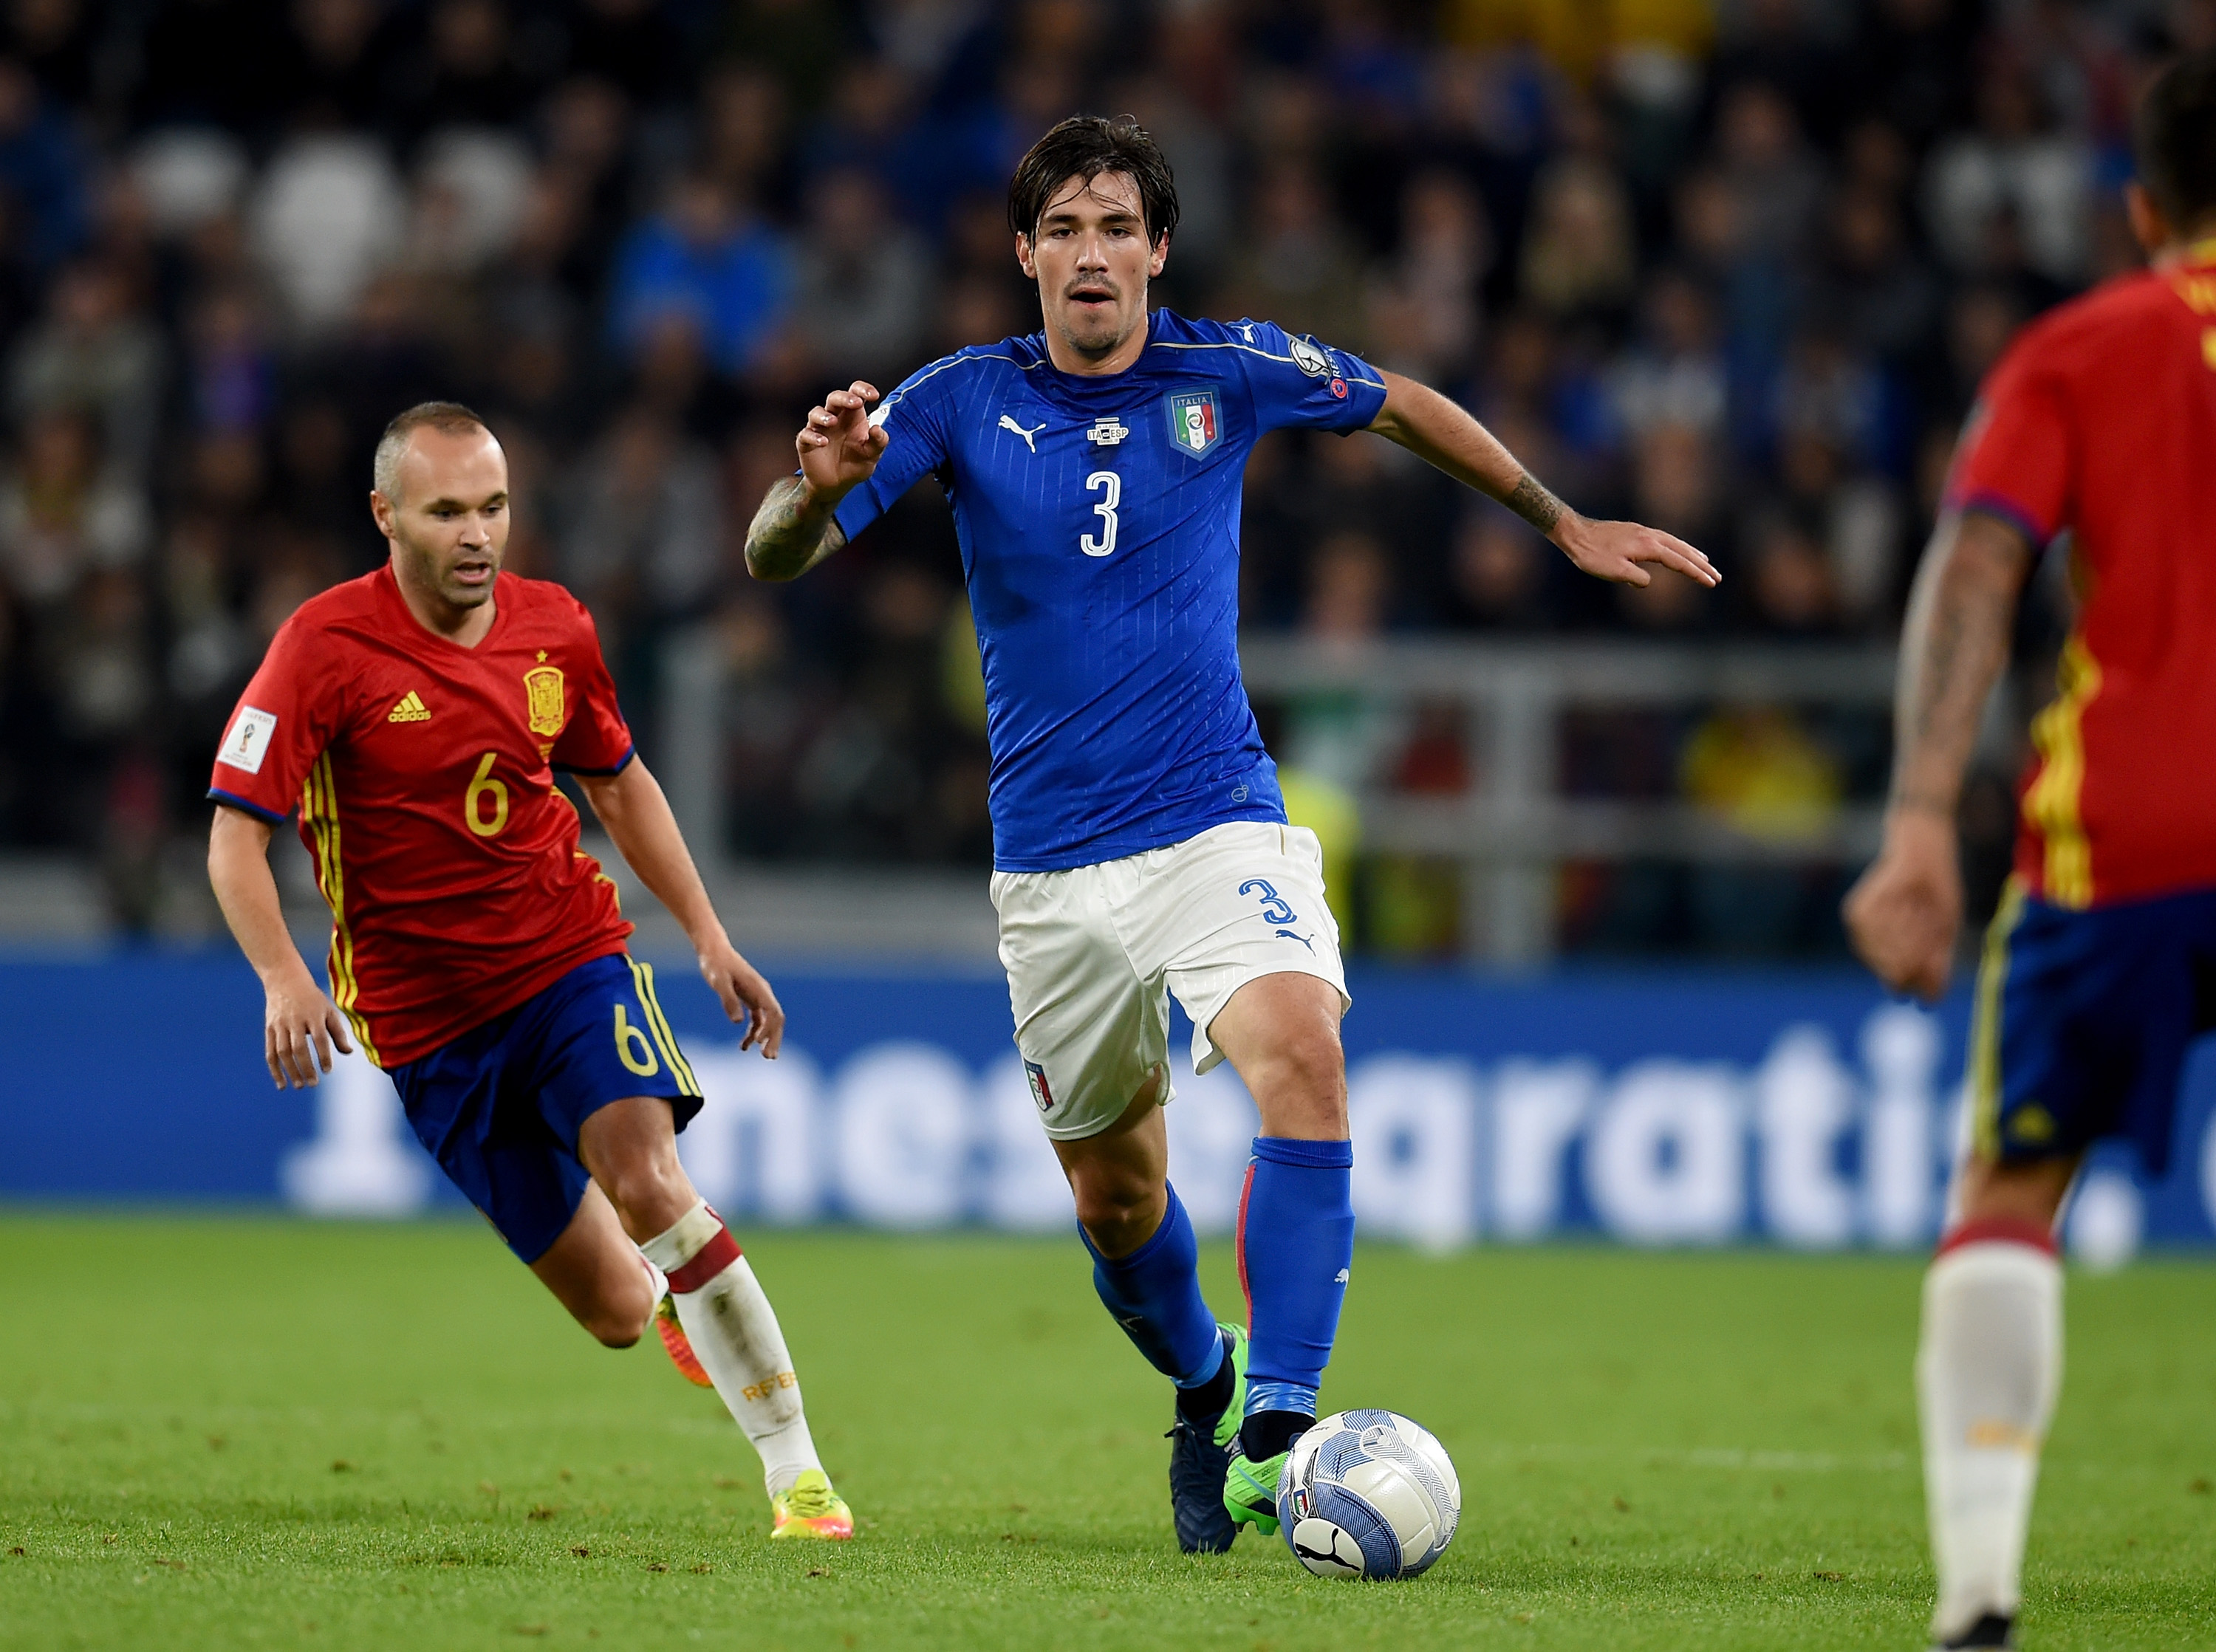 TURIN, ITALY - OCTOBER 06:  Alessio Romagnoli of Italy #3 in action during the FIFA 2018 World Cup Qualifier between Italy and Spain at Juventus Stadium on October 6, 2016 in Turin, Italy.  (Photo by Claudio Villa/Getty Images)